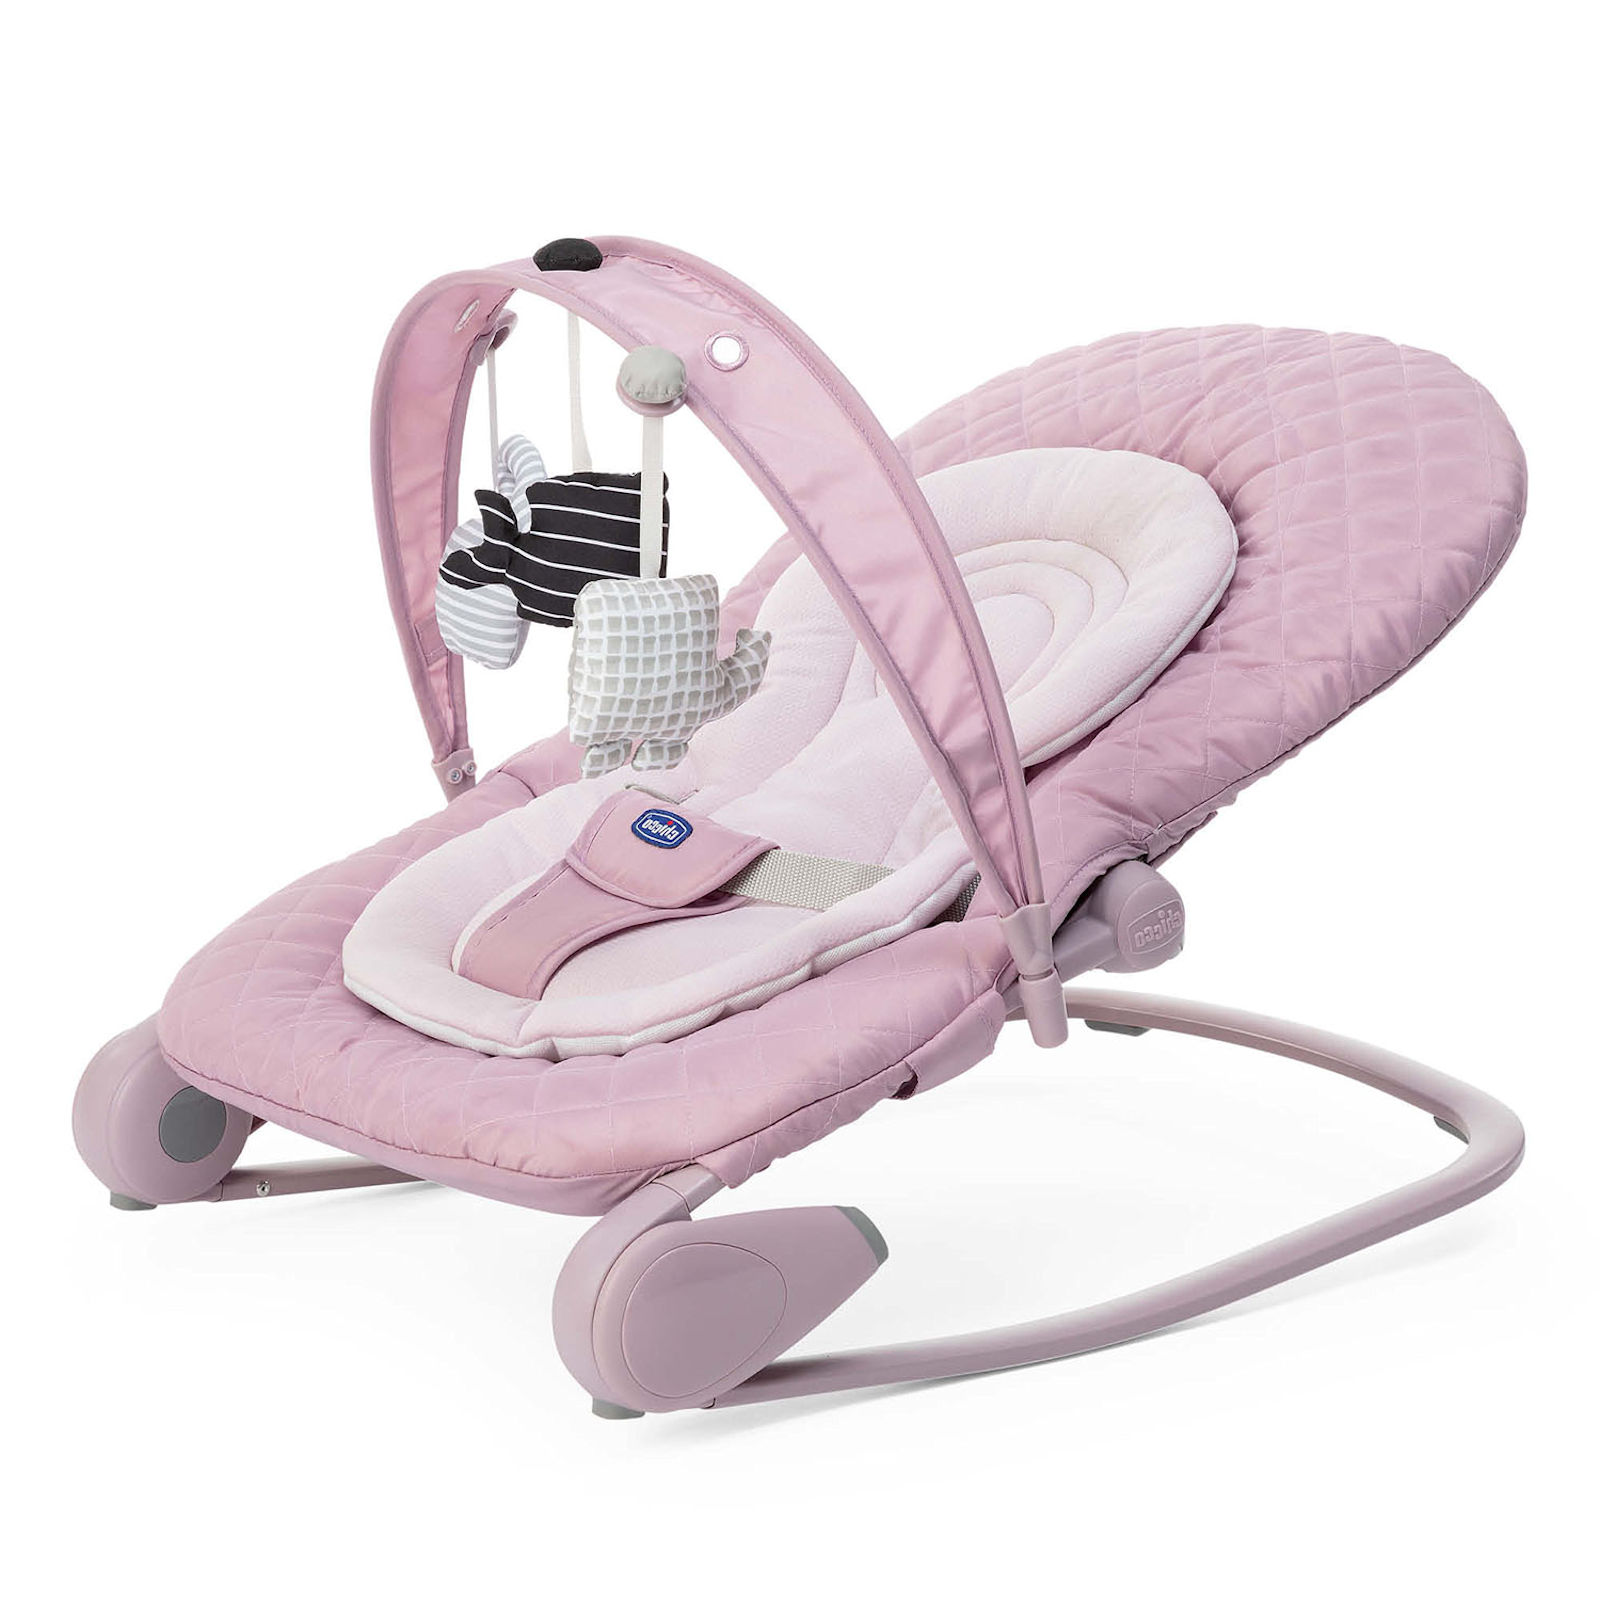 Chicco Hoopla 2in1 Baby Bouncer Rocker Seat – Blossom Pink 